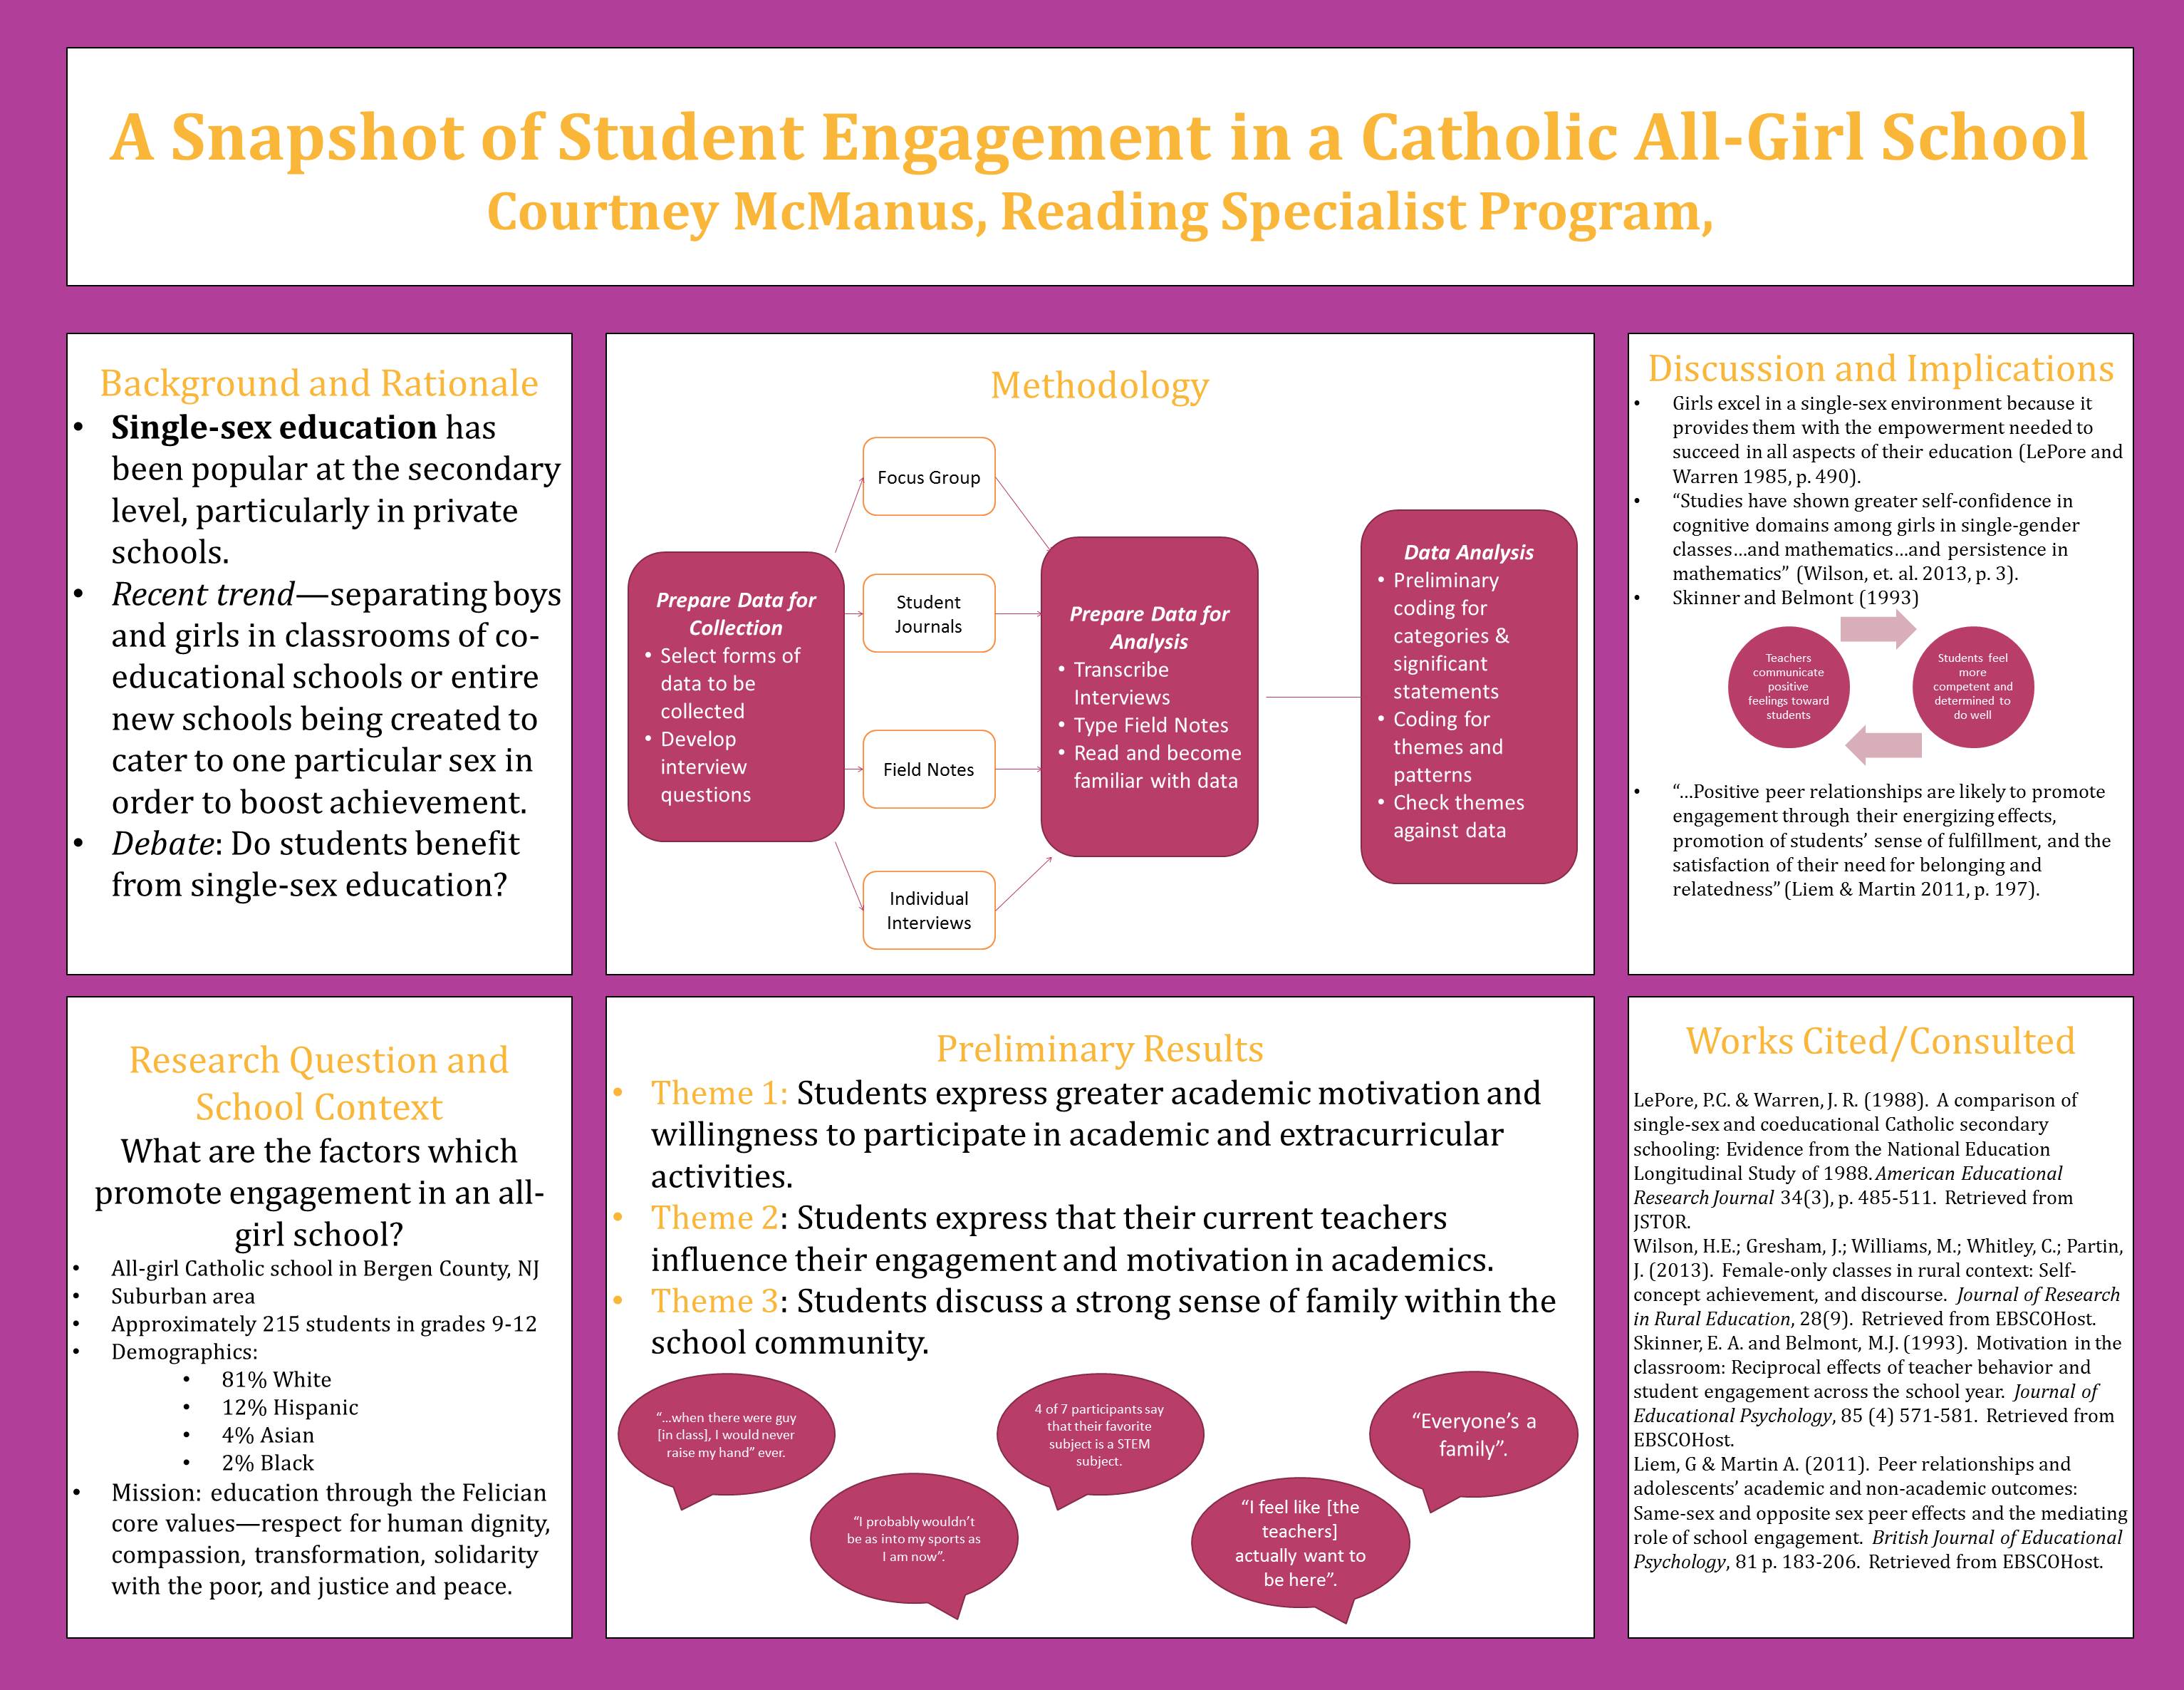 poster image: 'A snapshot of student engagement in a Catholic all-girl school'